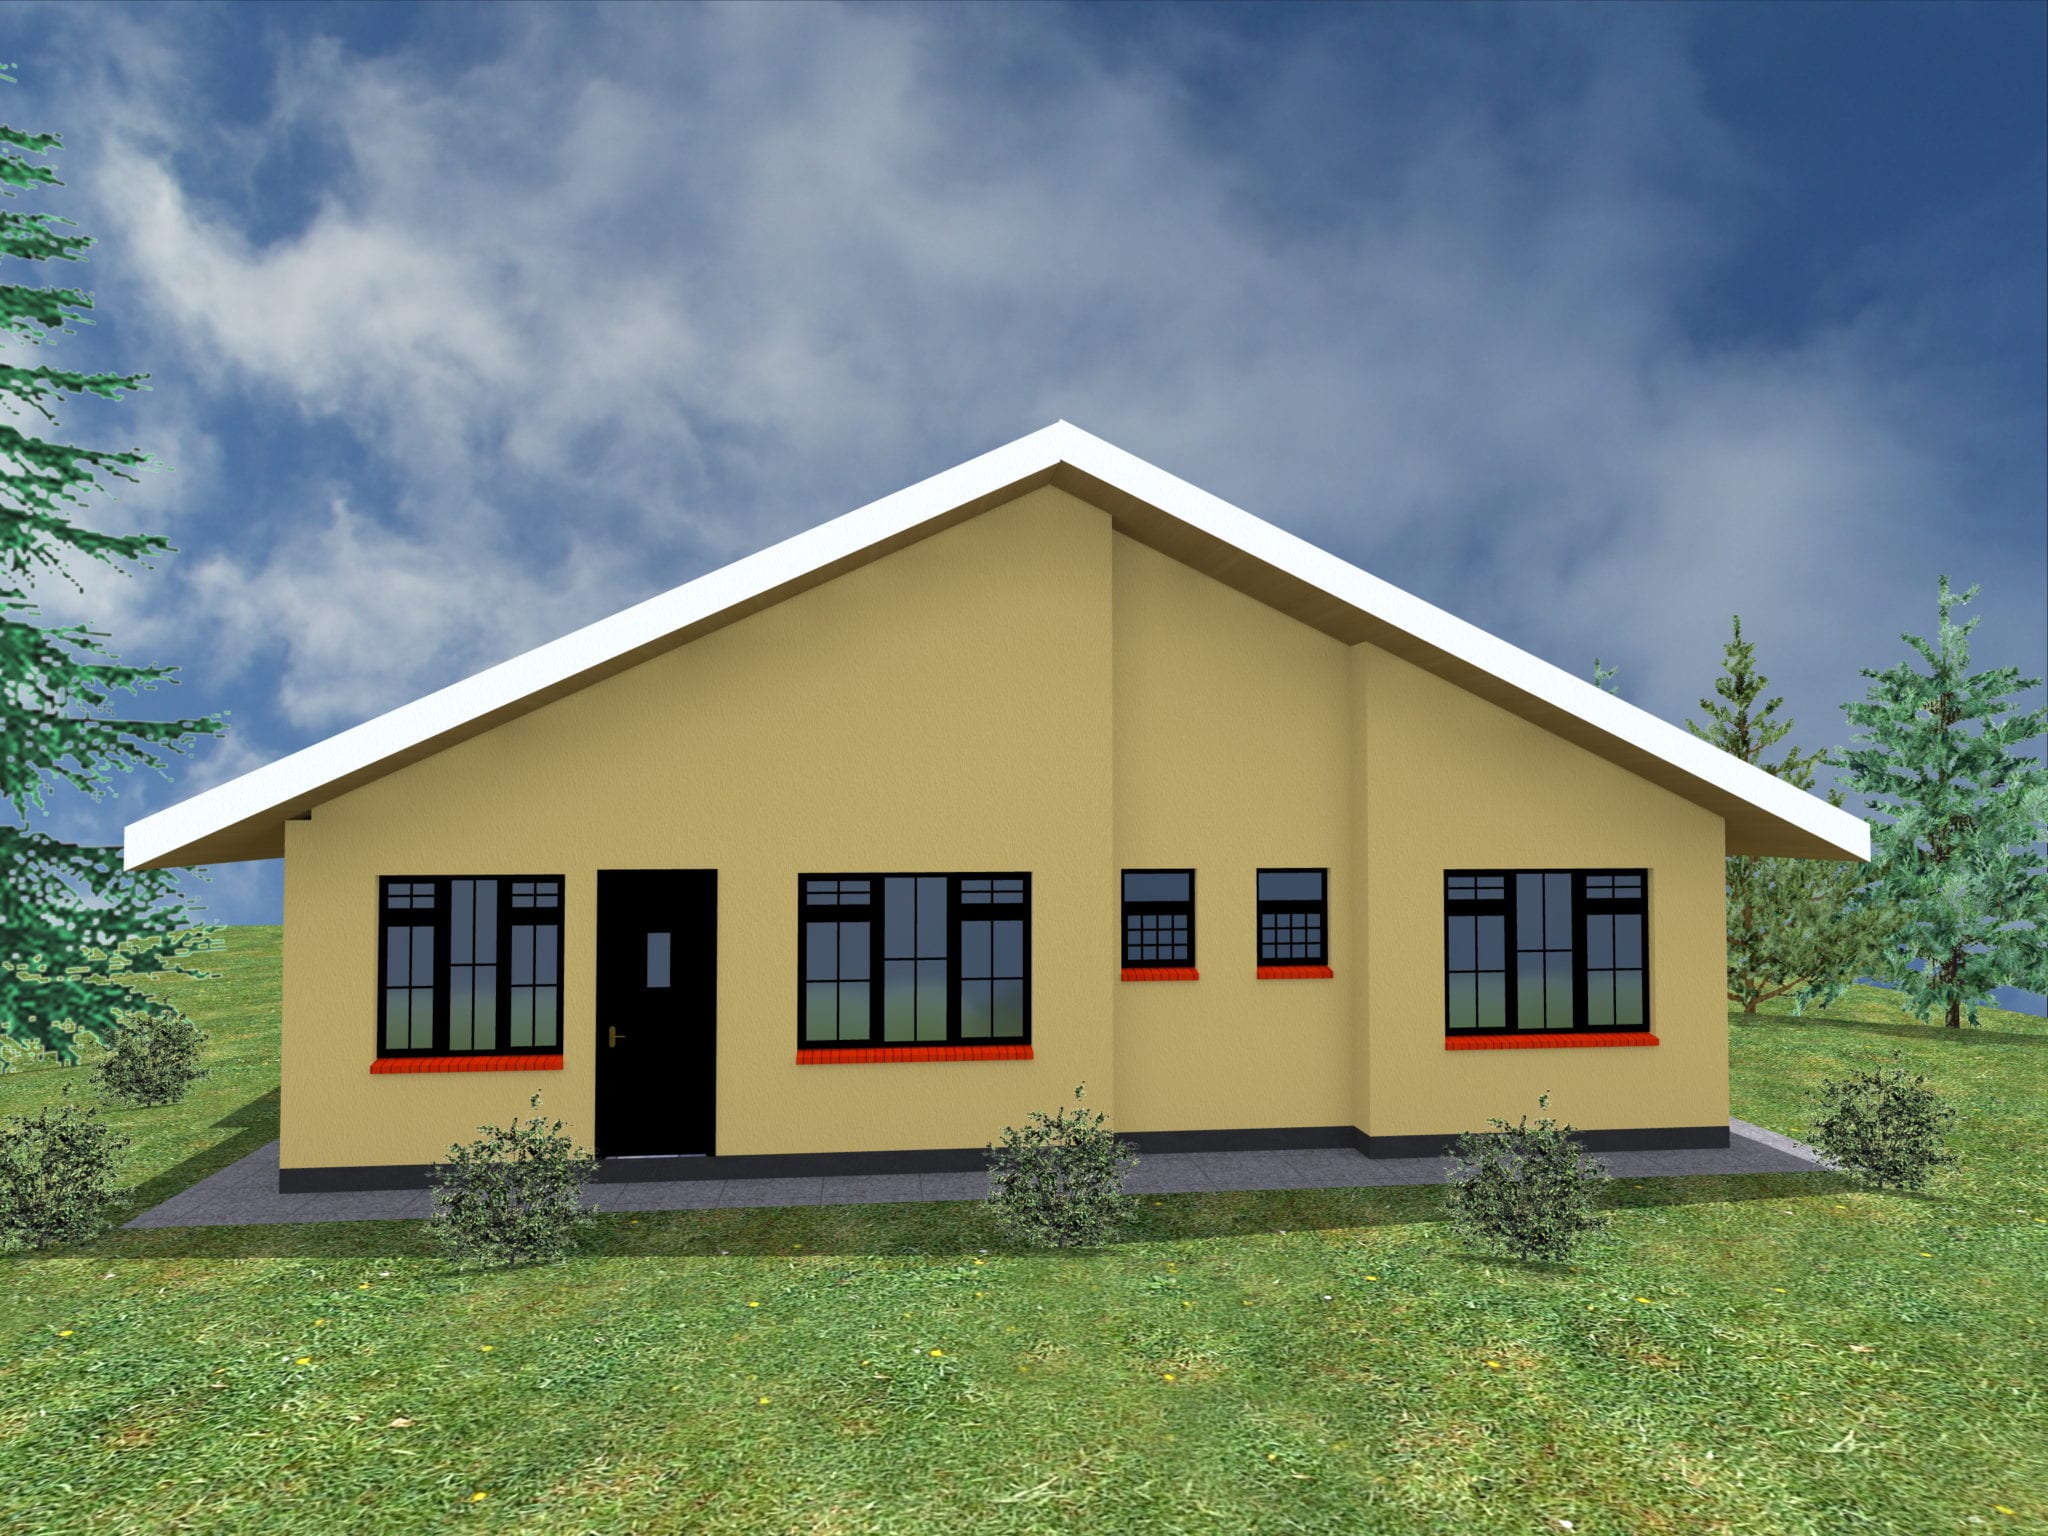 Simple 3  bedroom  house  plans  without  garage  HPD Consult